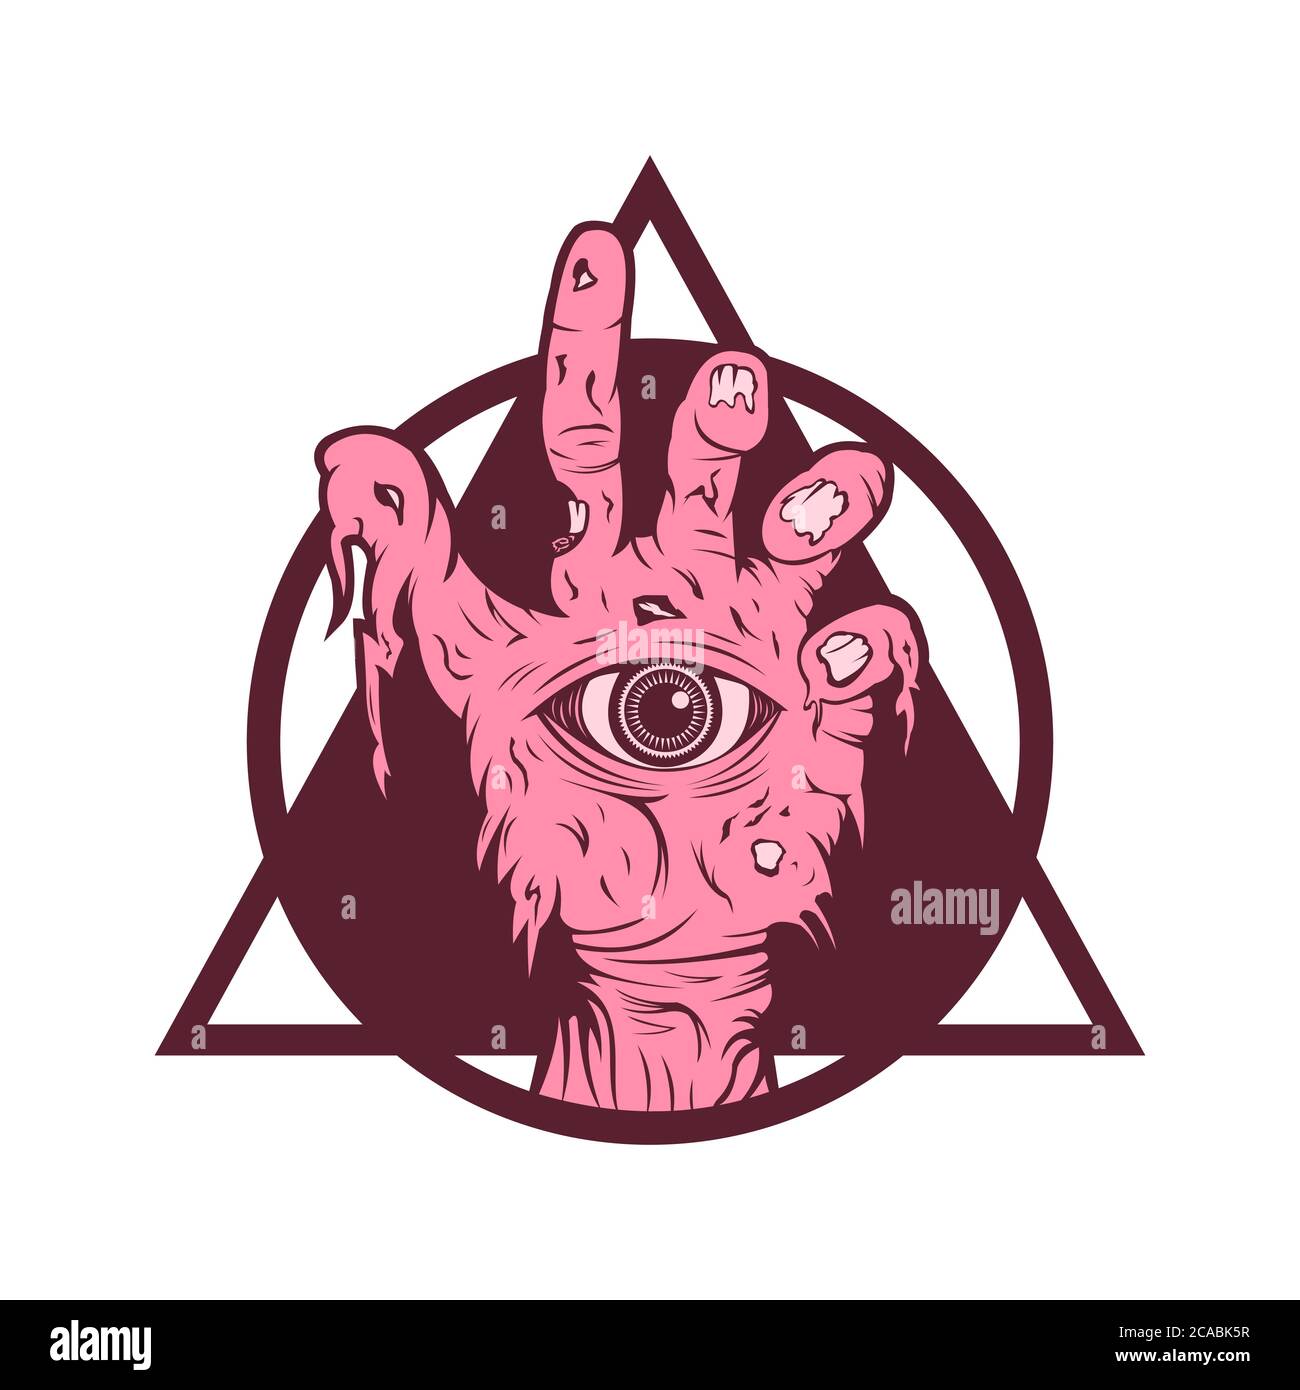 Zombie hand pink vector illustration amazing design for your company or brand Stock Vector